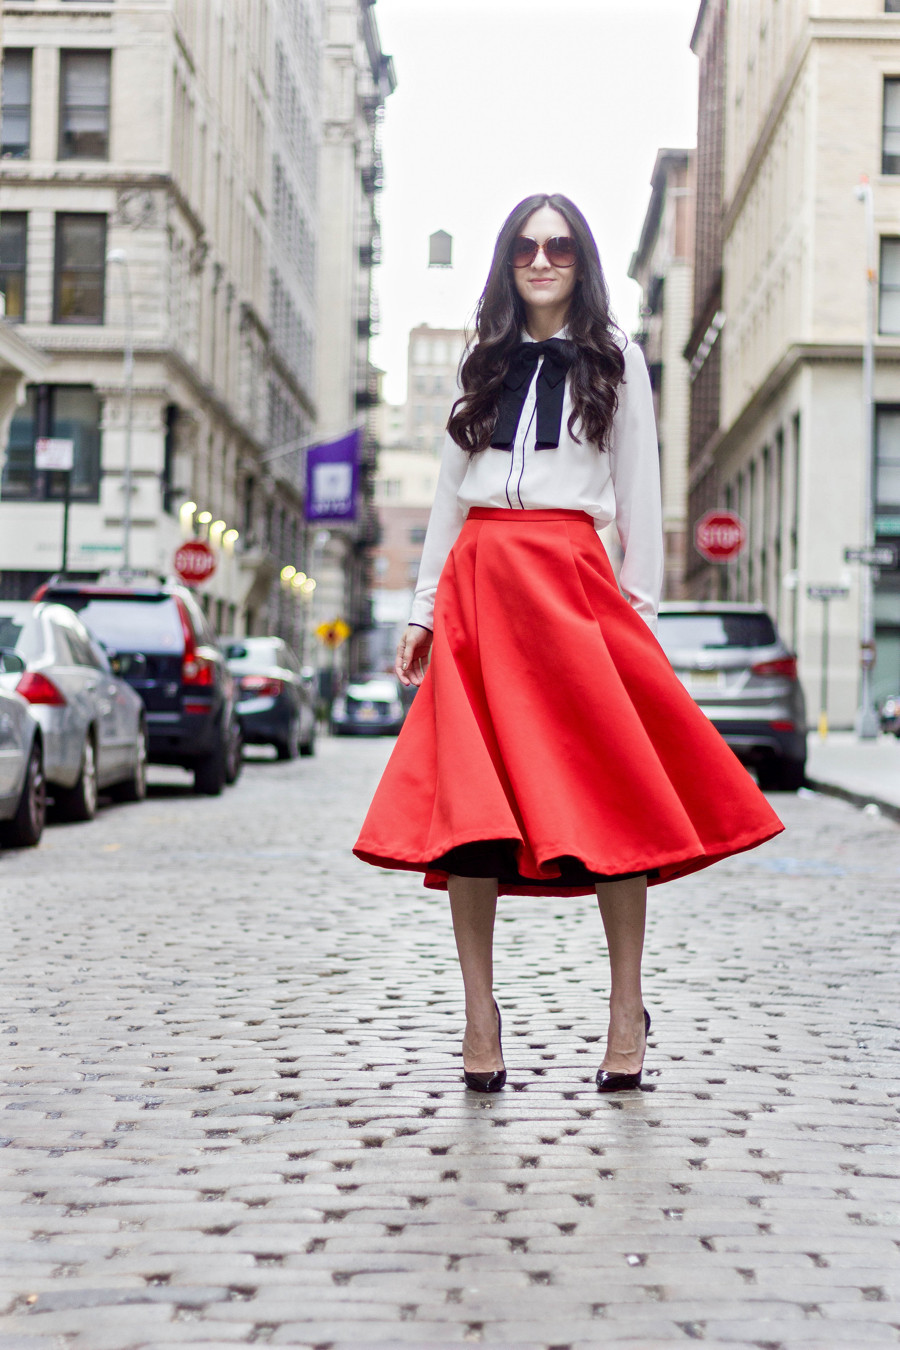 ASOS Blouse With Contrast Piping, Asos blouse, asos blouse with piping, black piping, white blouse with black piping, asos white and black shirt, asos black and white top, tracy reese red skirt, silk faille skirt, tracy reese bright red skirt, tracy reese crimson party skirt, tracy reese canella  ball skirt, anthropologie canella ball skirt, asos bow tie, asos big bow, asos black bow tie, christian louboutin heels, pigalle 120 mm, pigalle heels, louboutin black patent heels